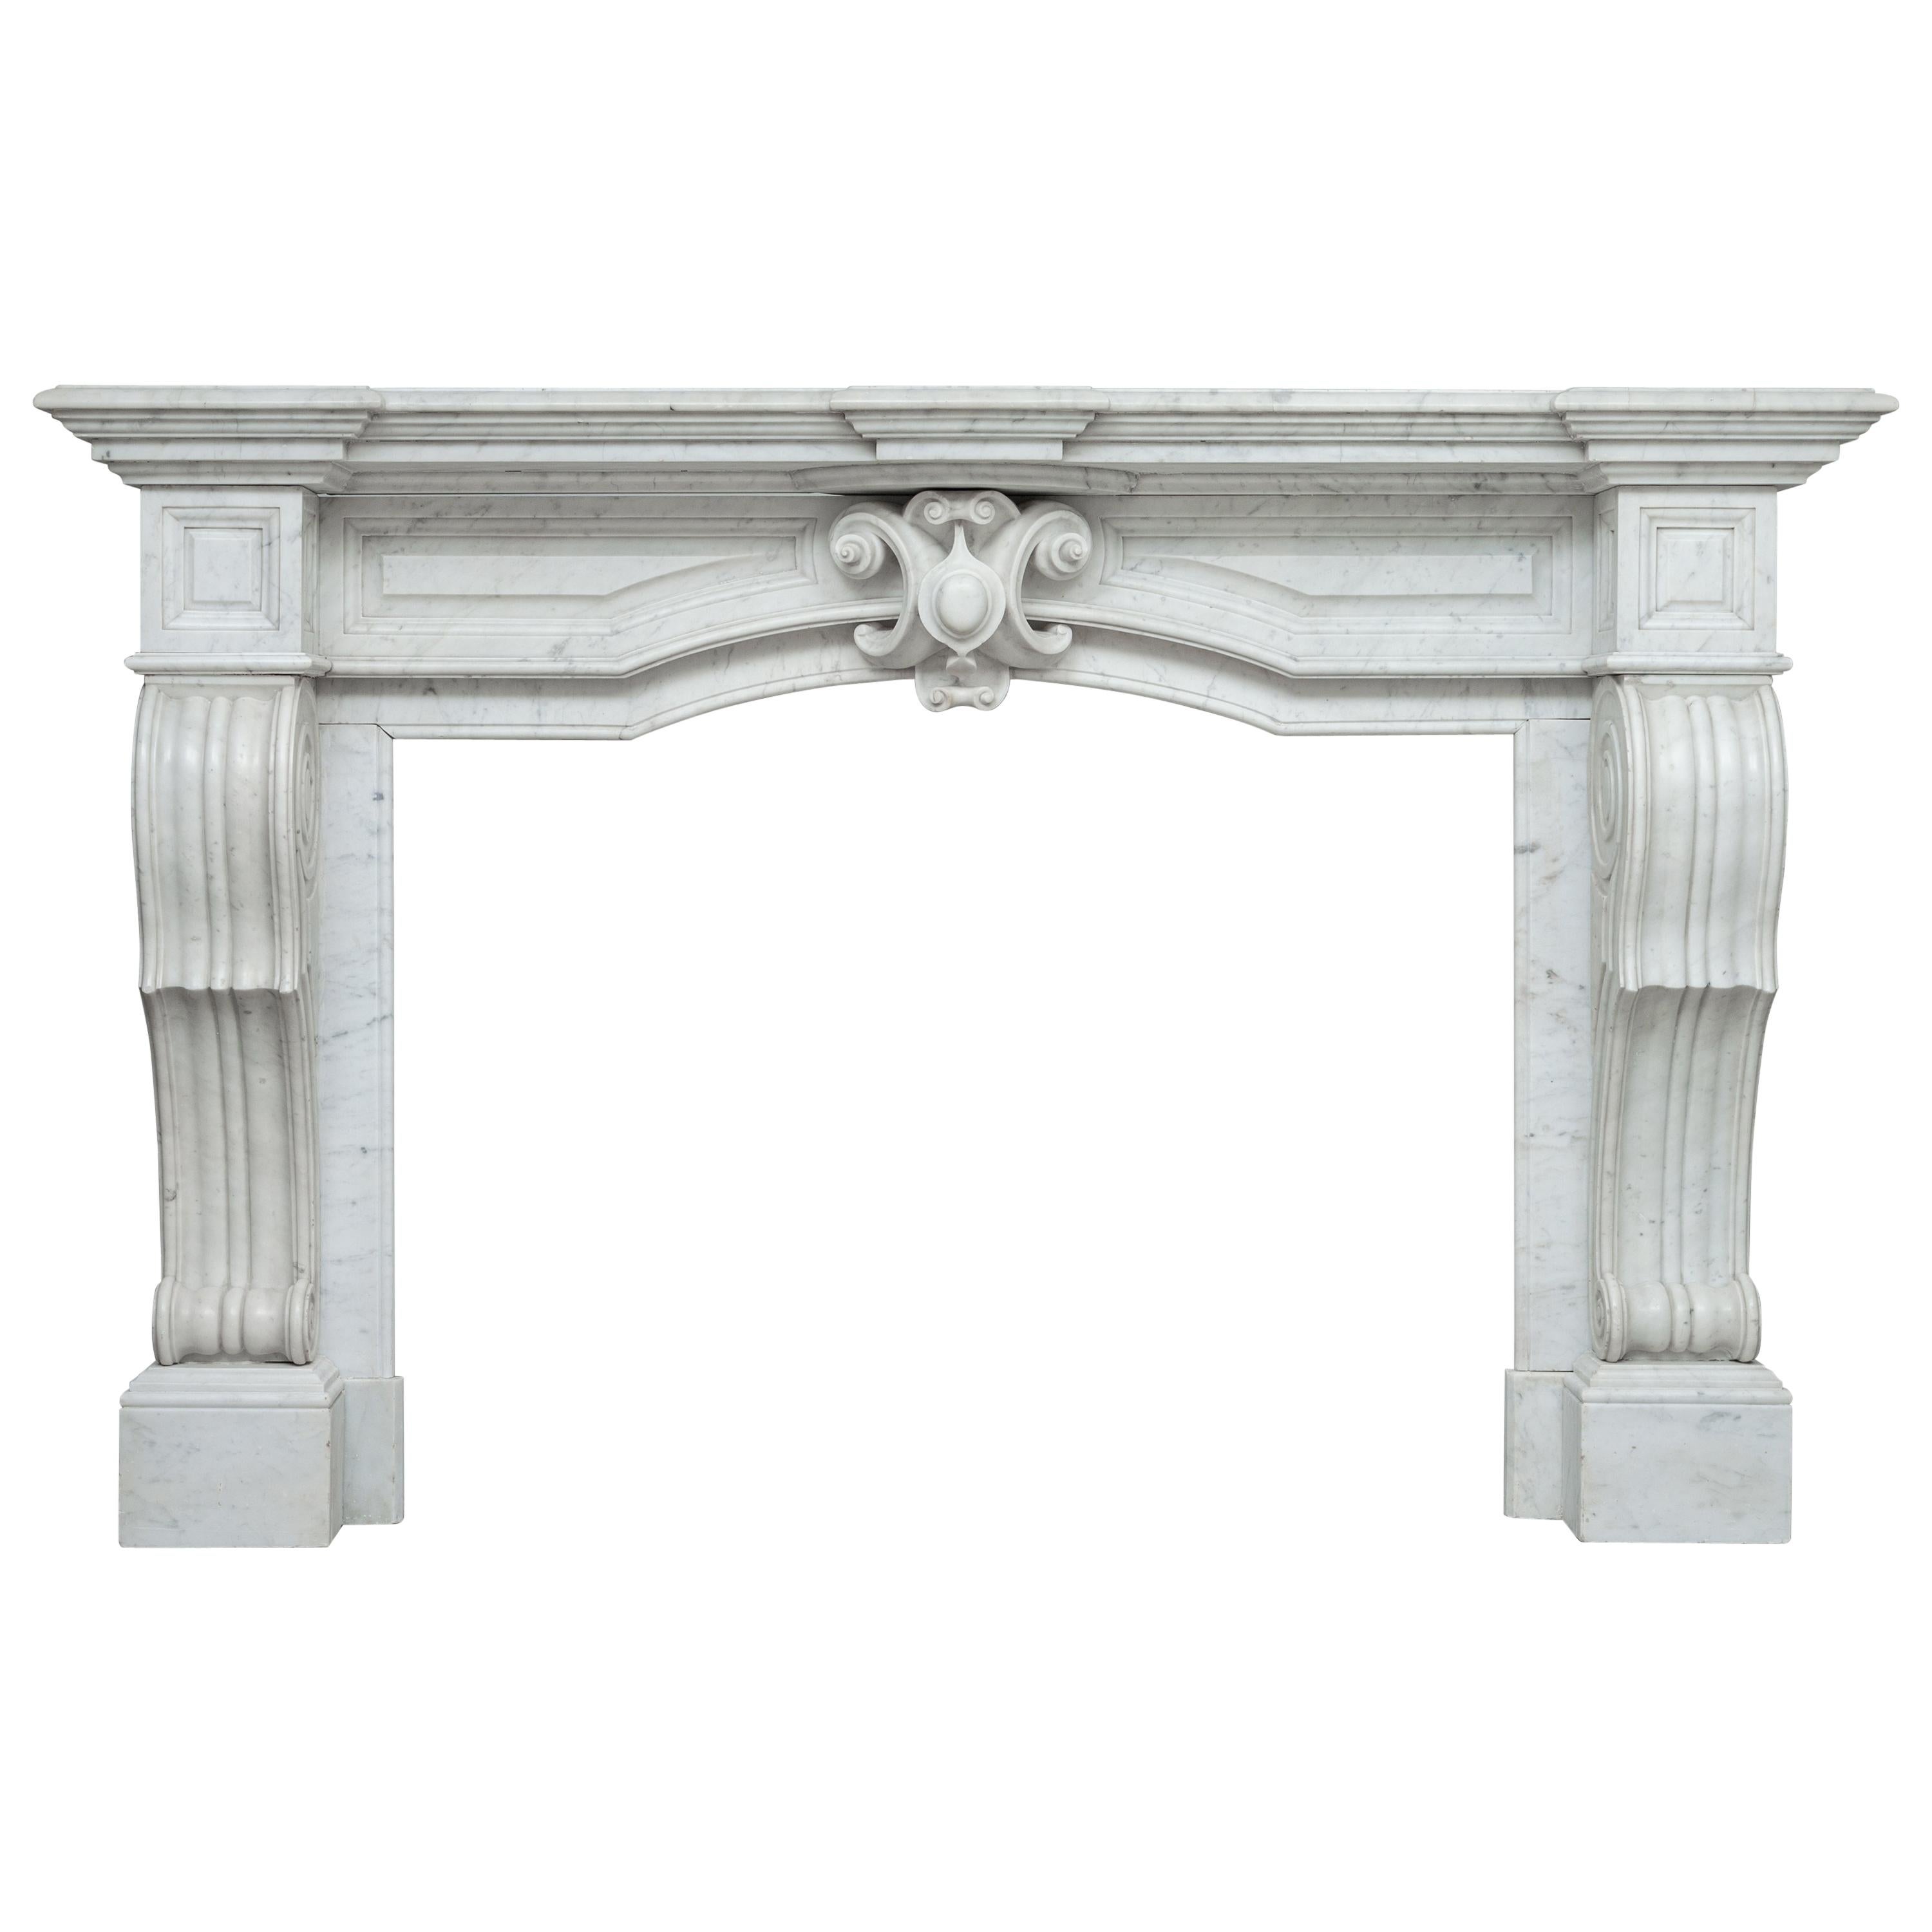 Neoclassical French Carrara White Marble Antique Fireplace